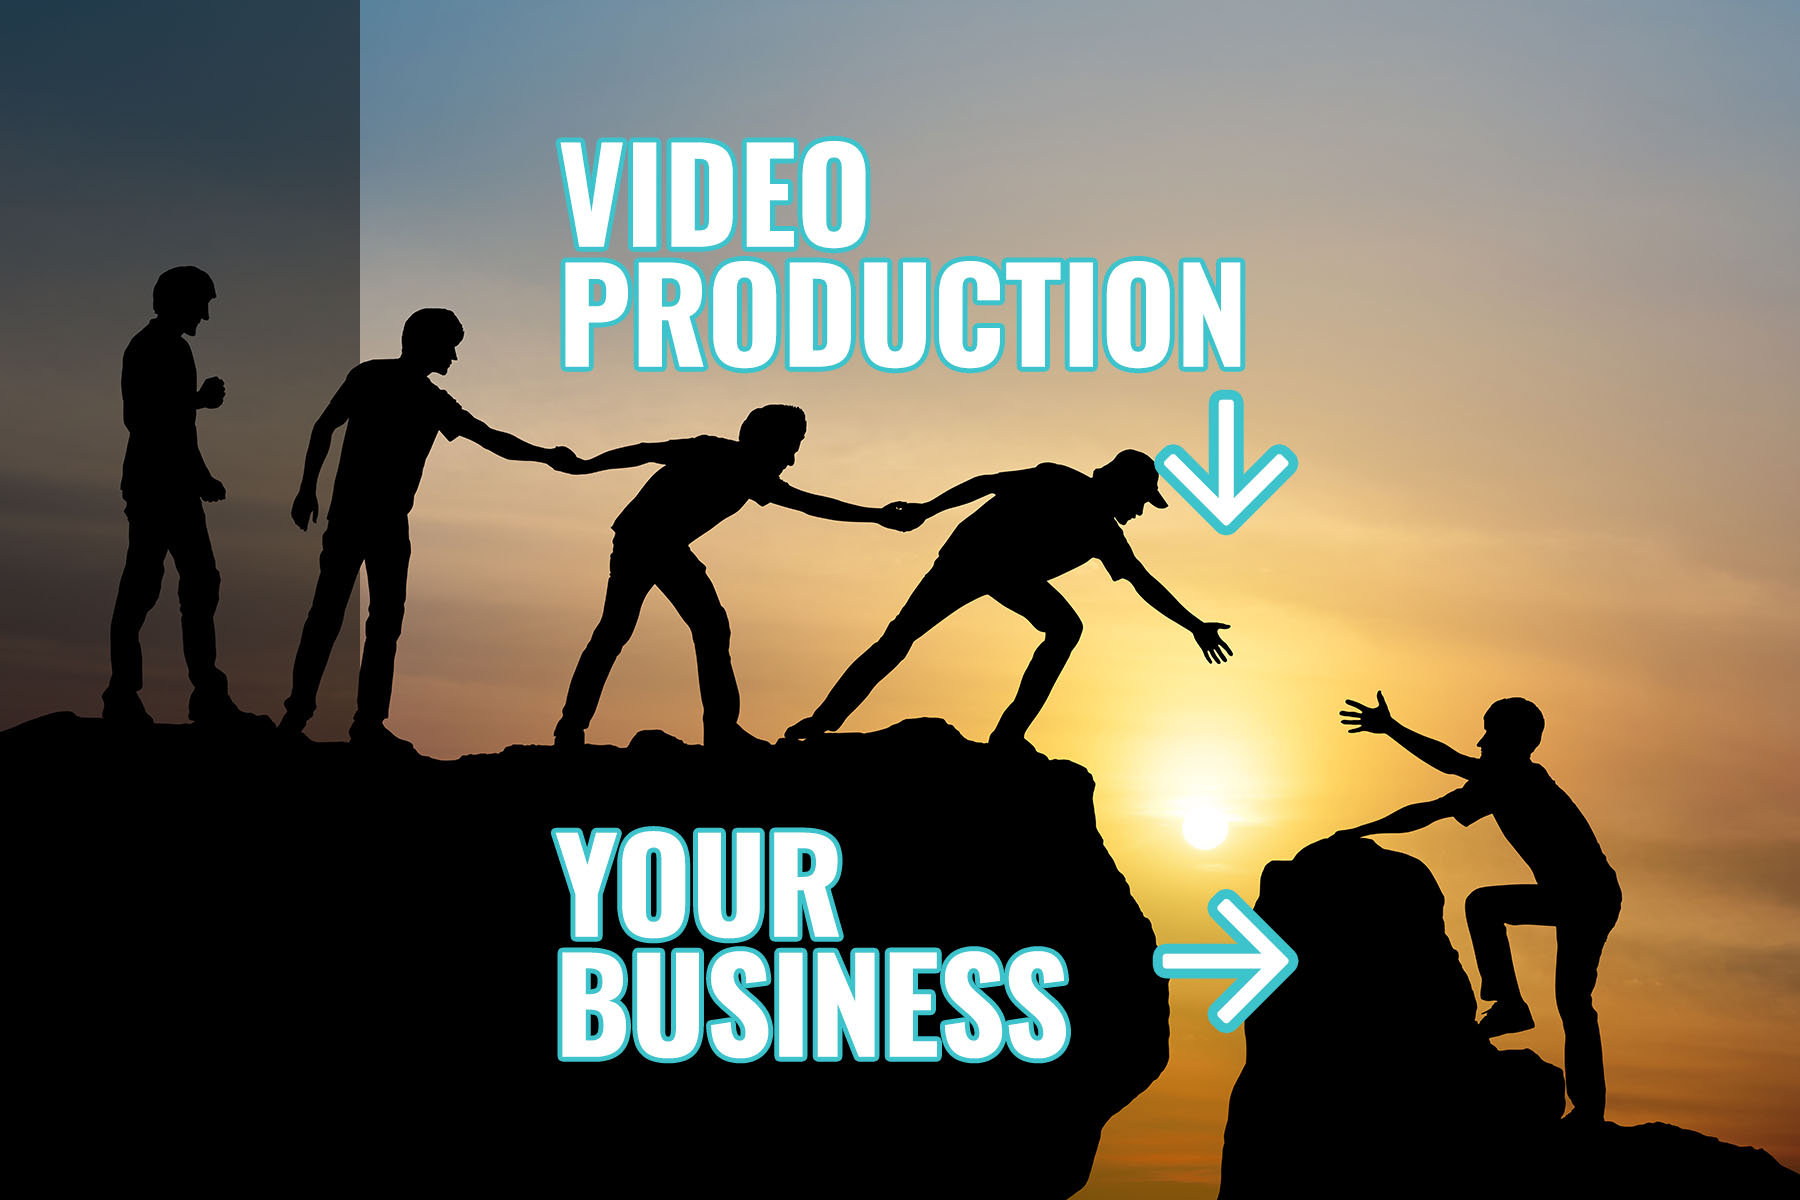 Why Video Production Is Good for Businesses